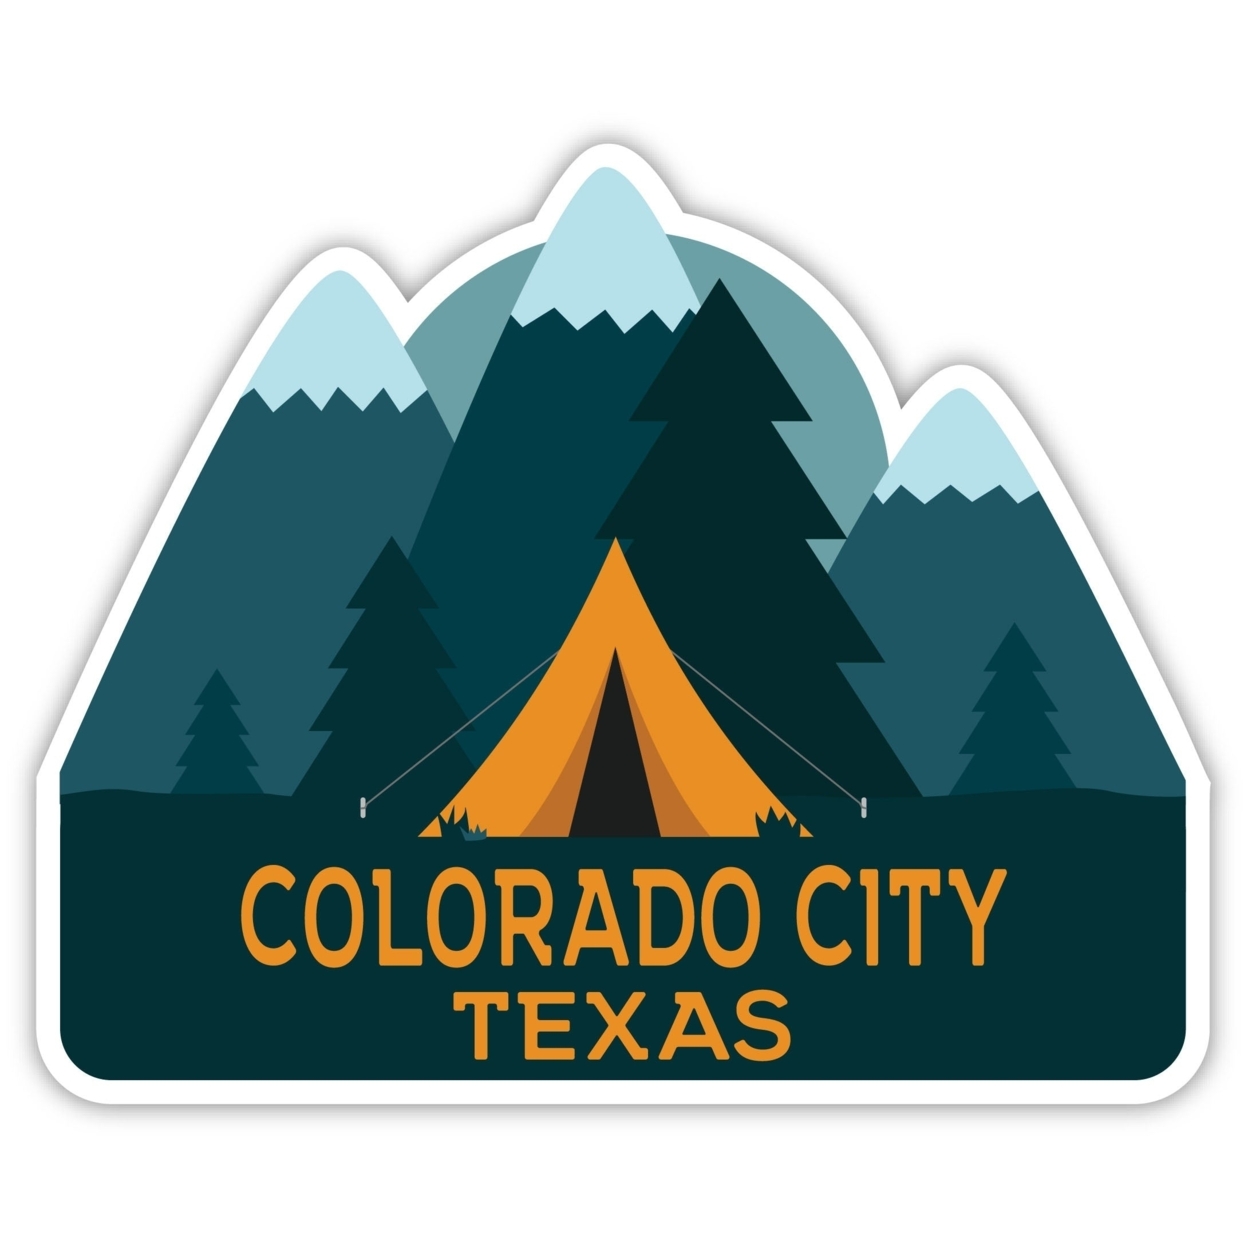 Colorado City Texas Souvenir Decorative Stickers (Choose Theme And Size) - 4-Pack, 10-Inch, Tent